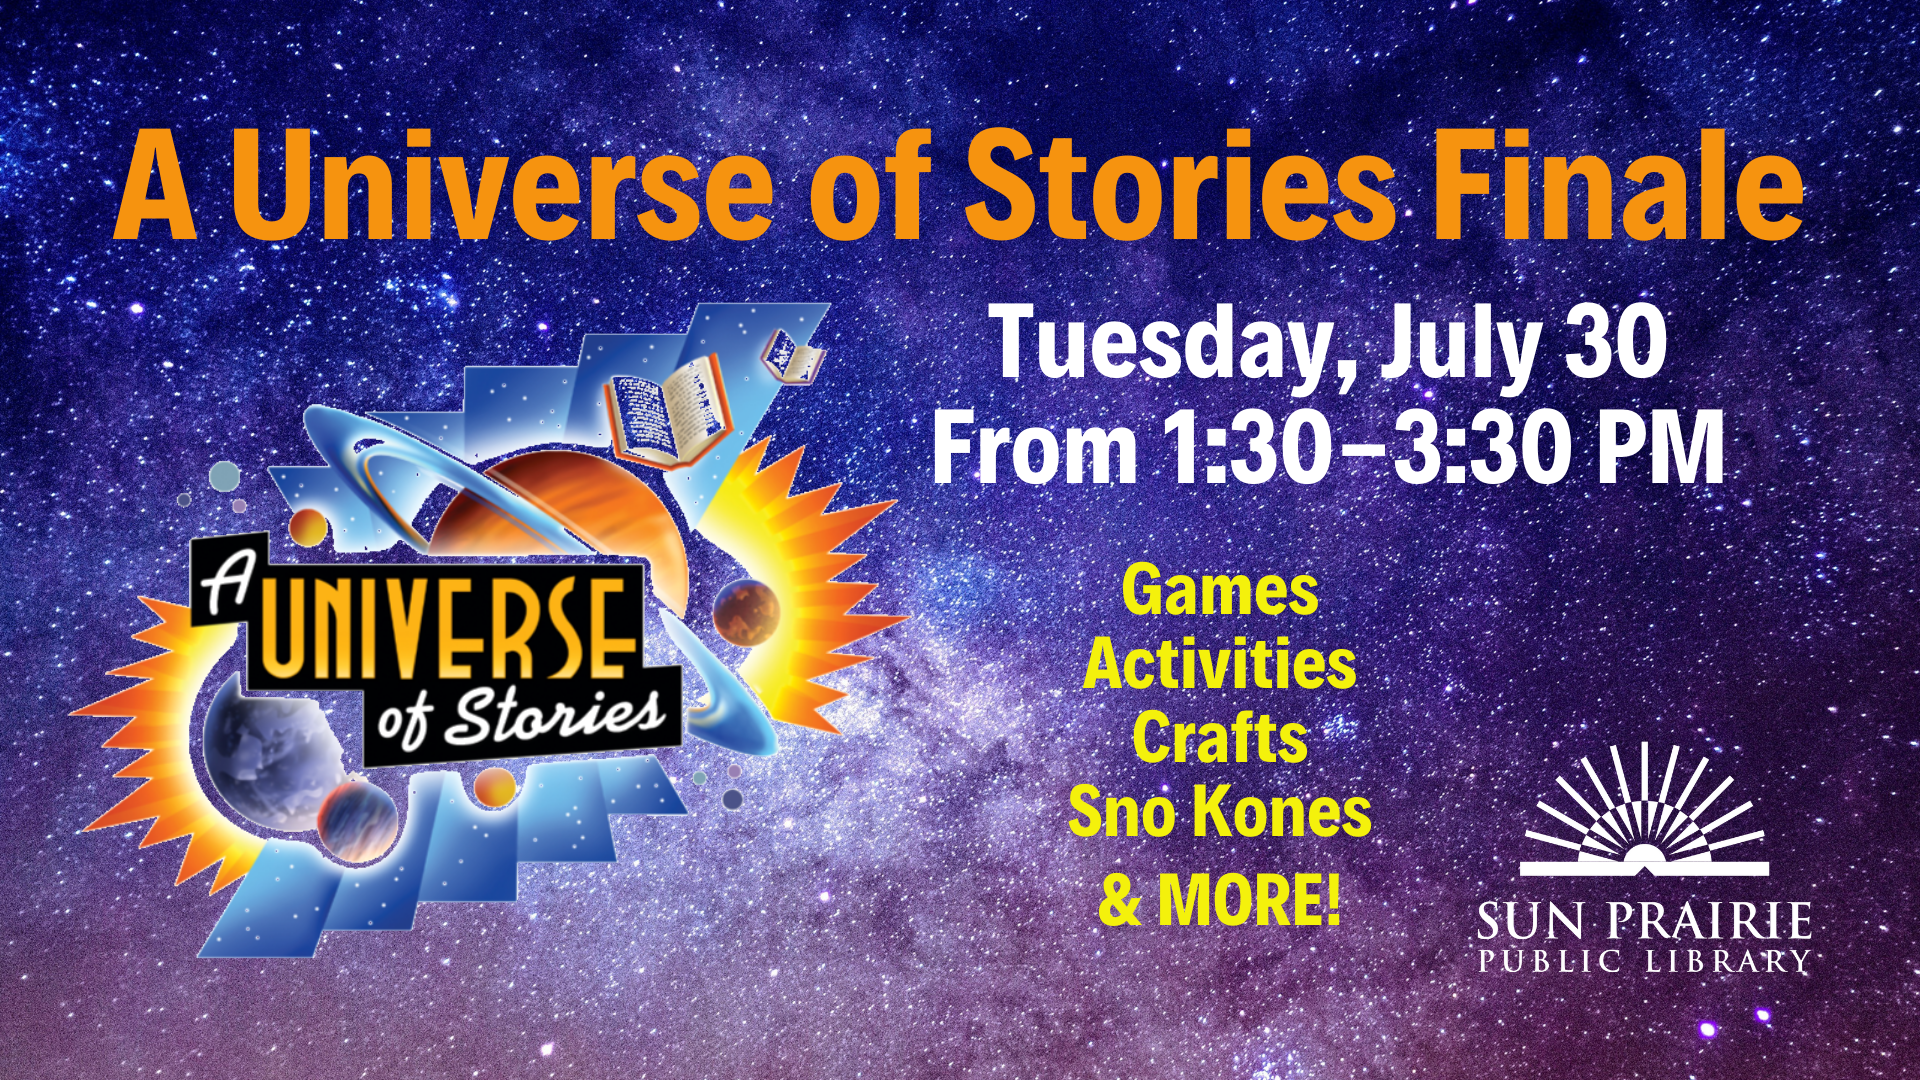 A Universe of Stories Finale date & time